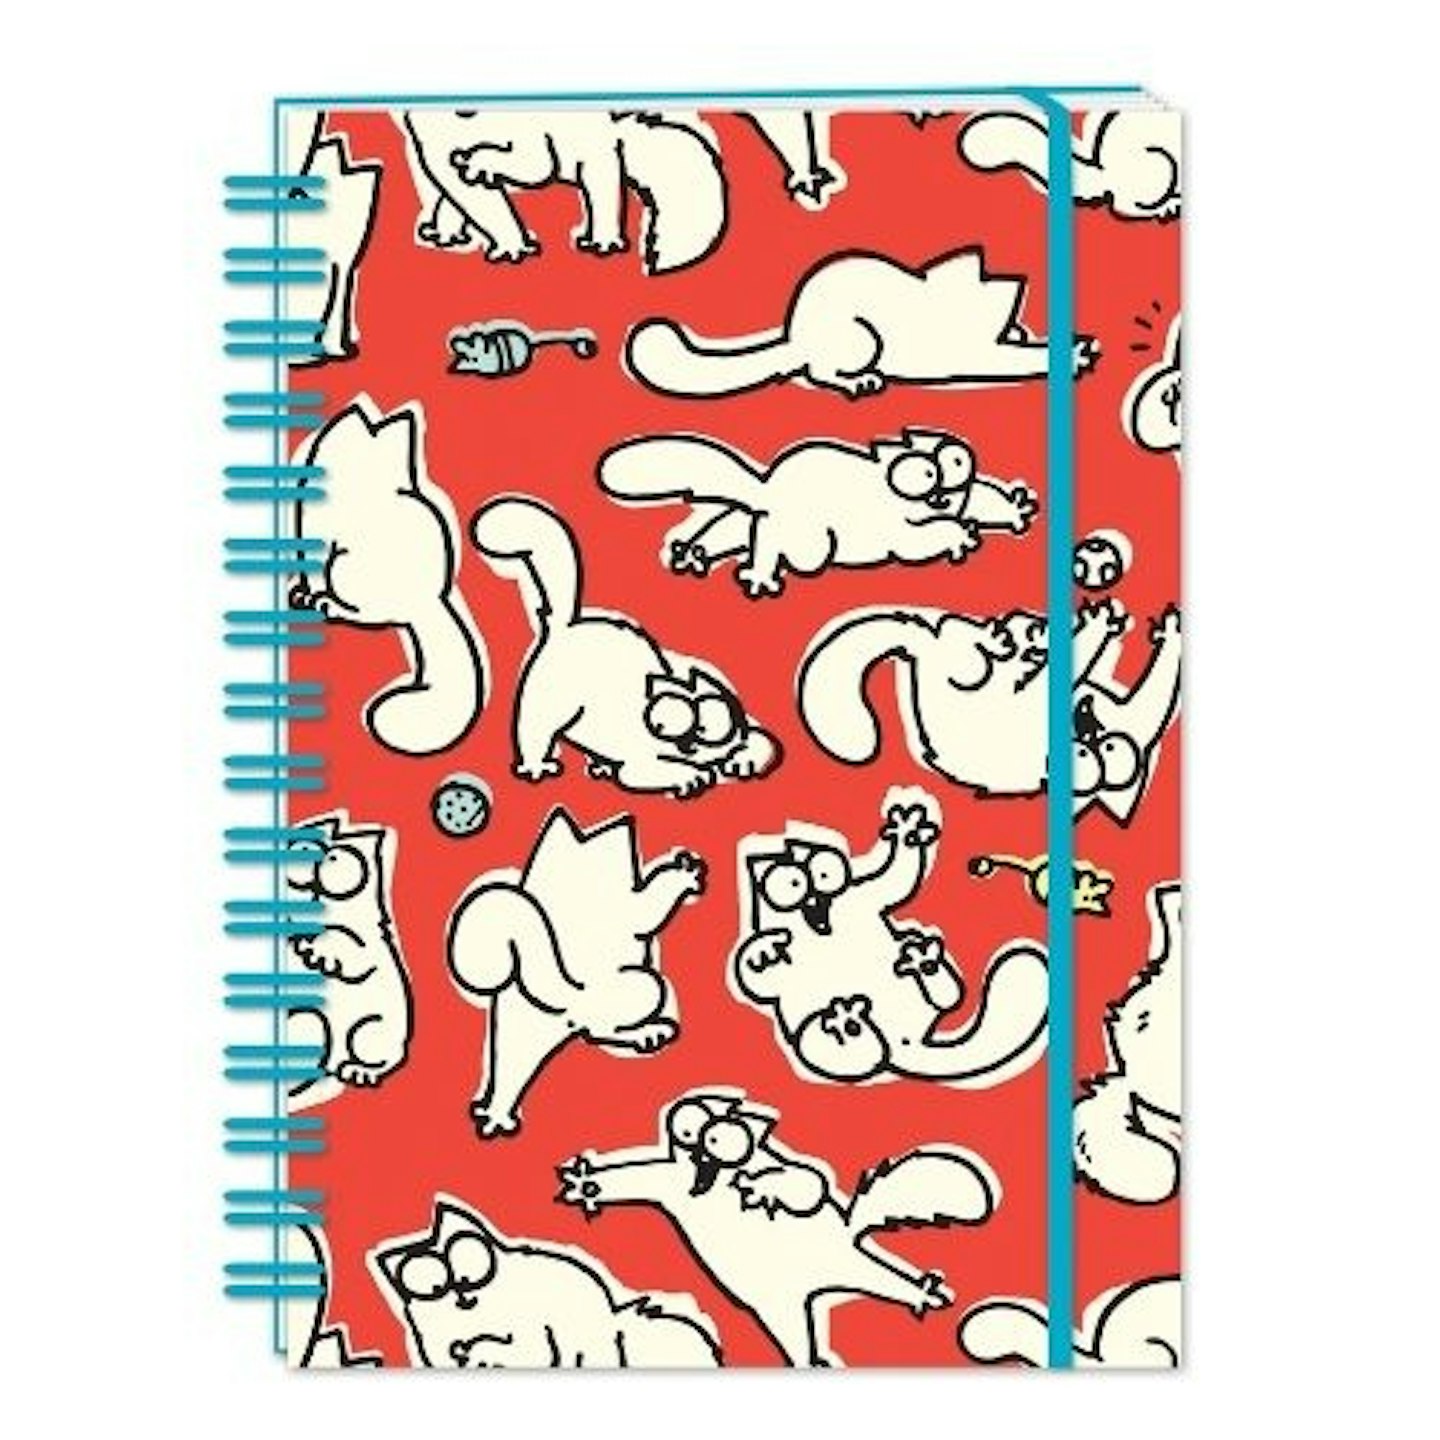 Simon's Cat A5 Notebook - Cats Playing